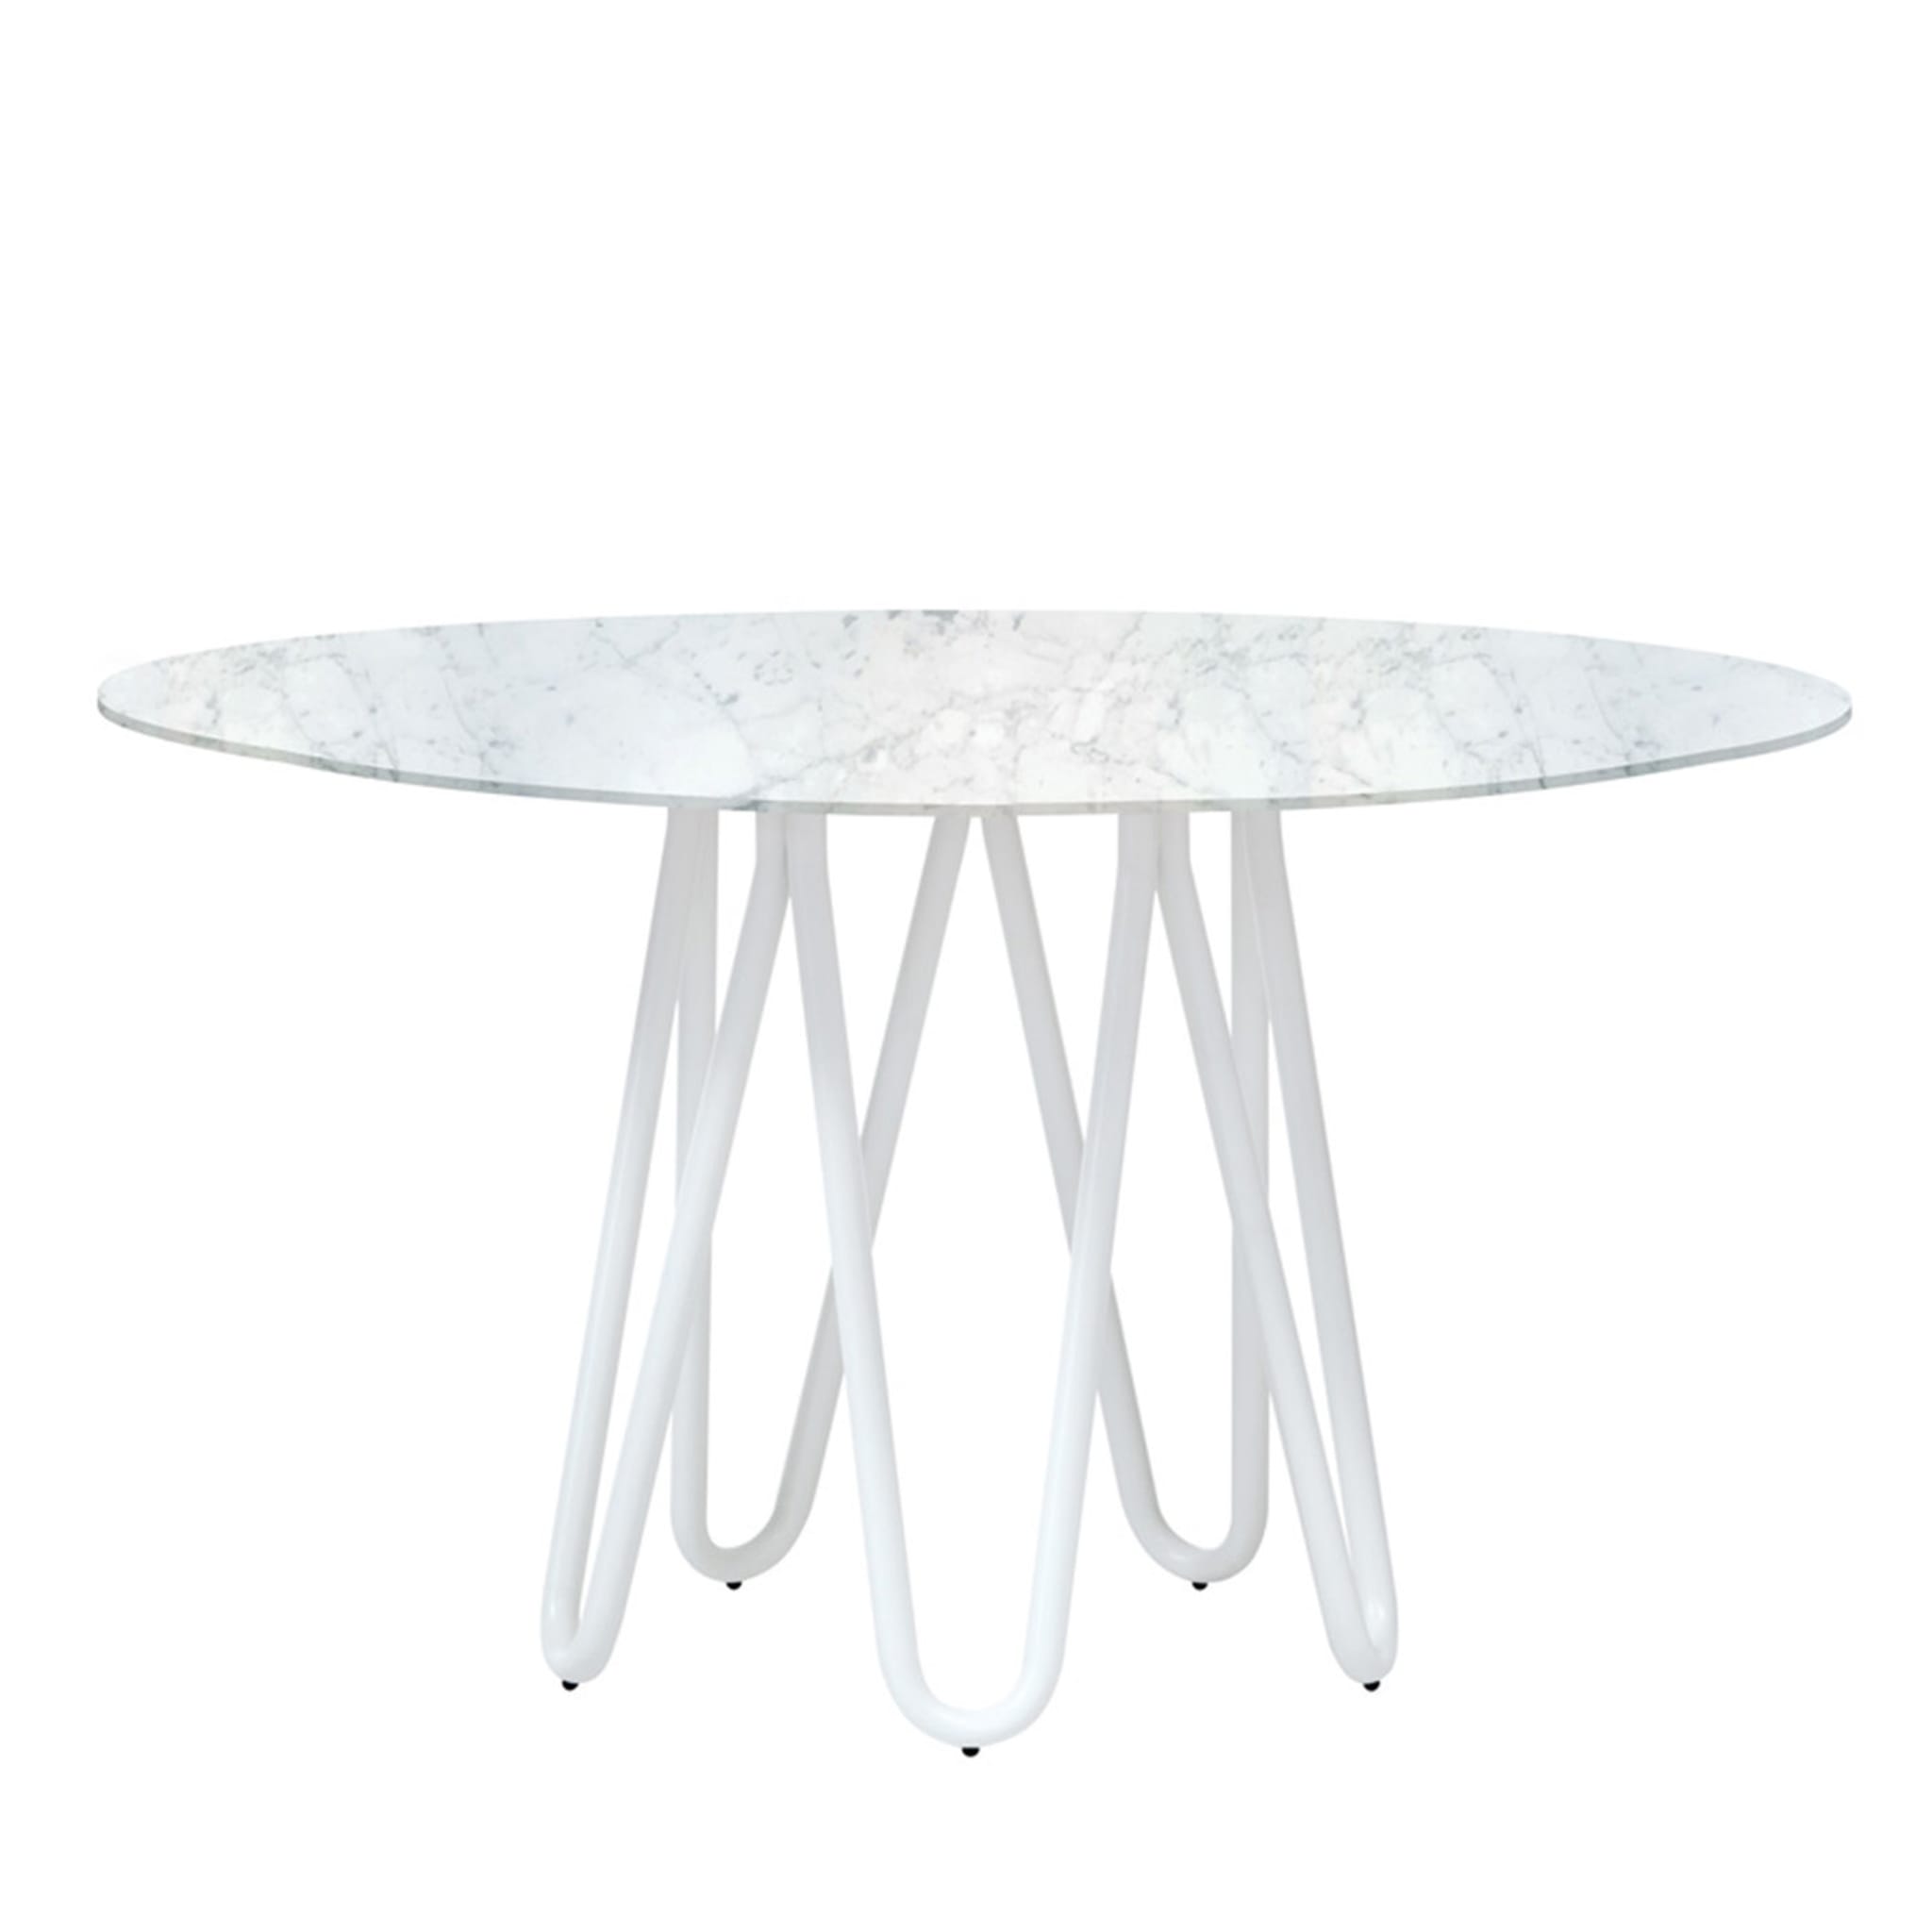 Meduse Dining Table with Carrara Marble Top by GamFratesi - Main view